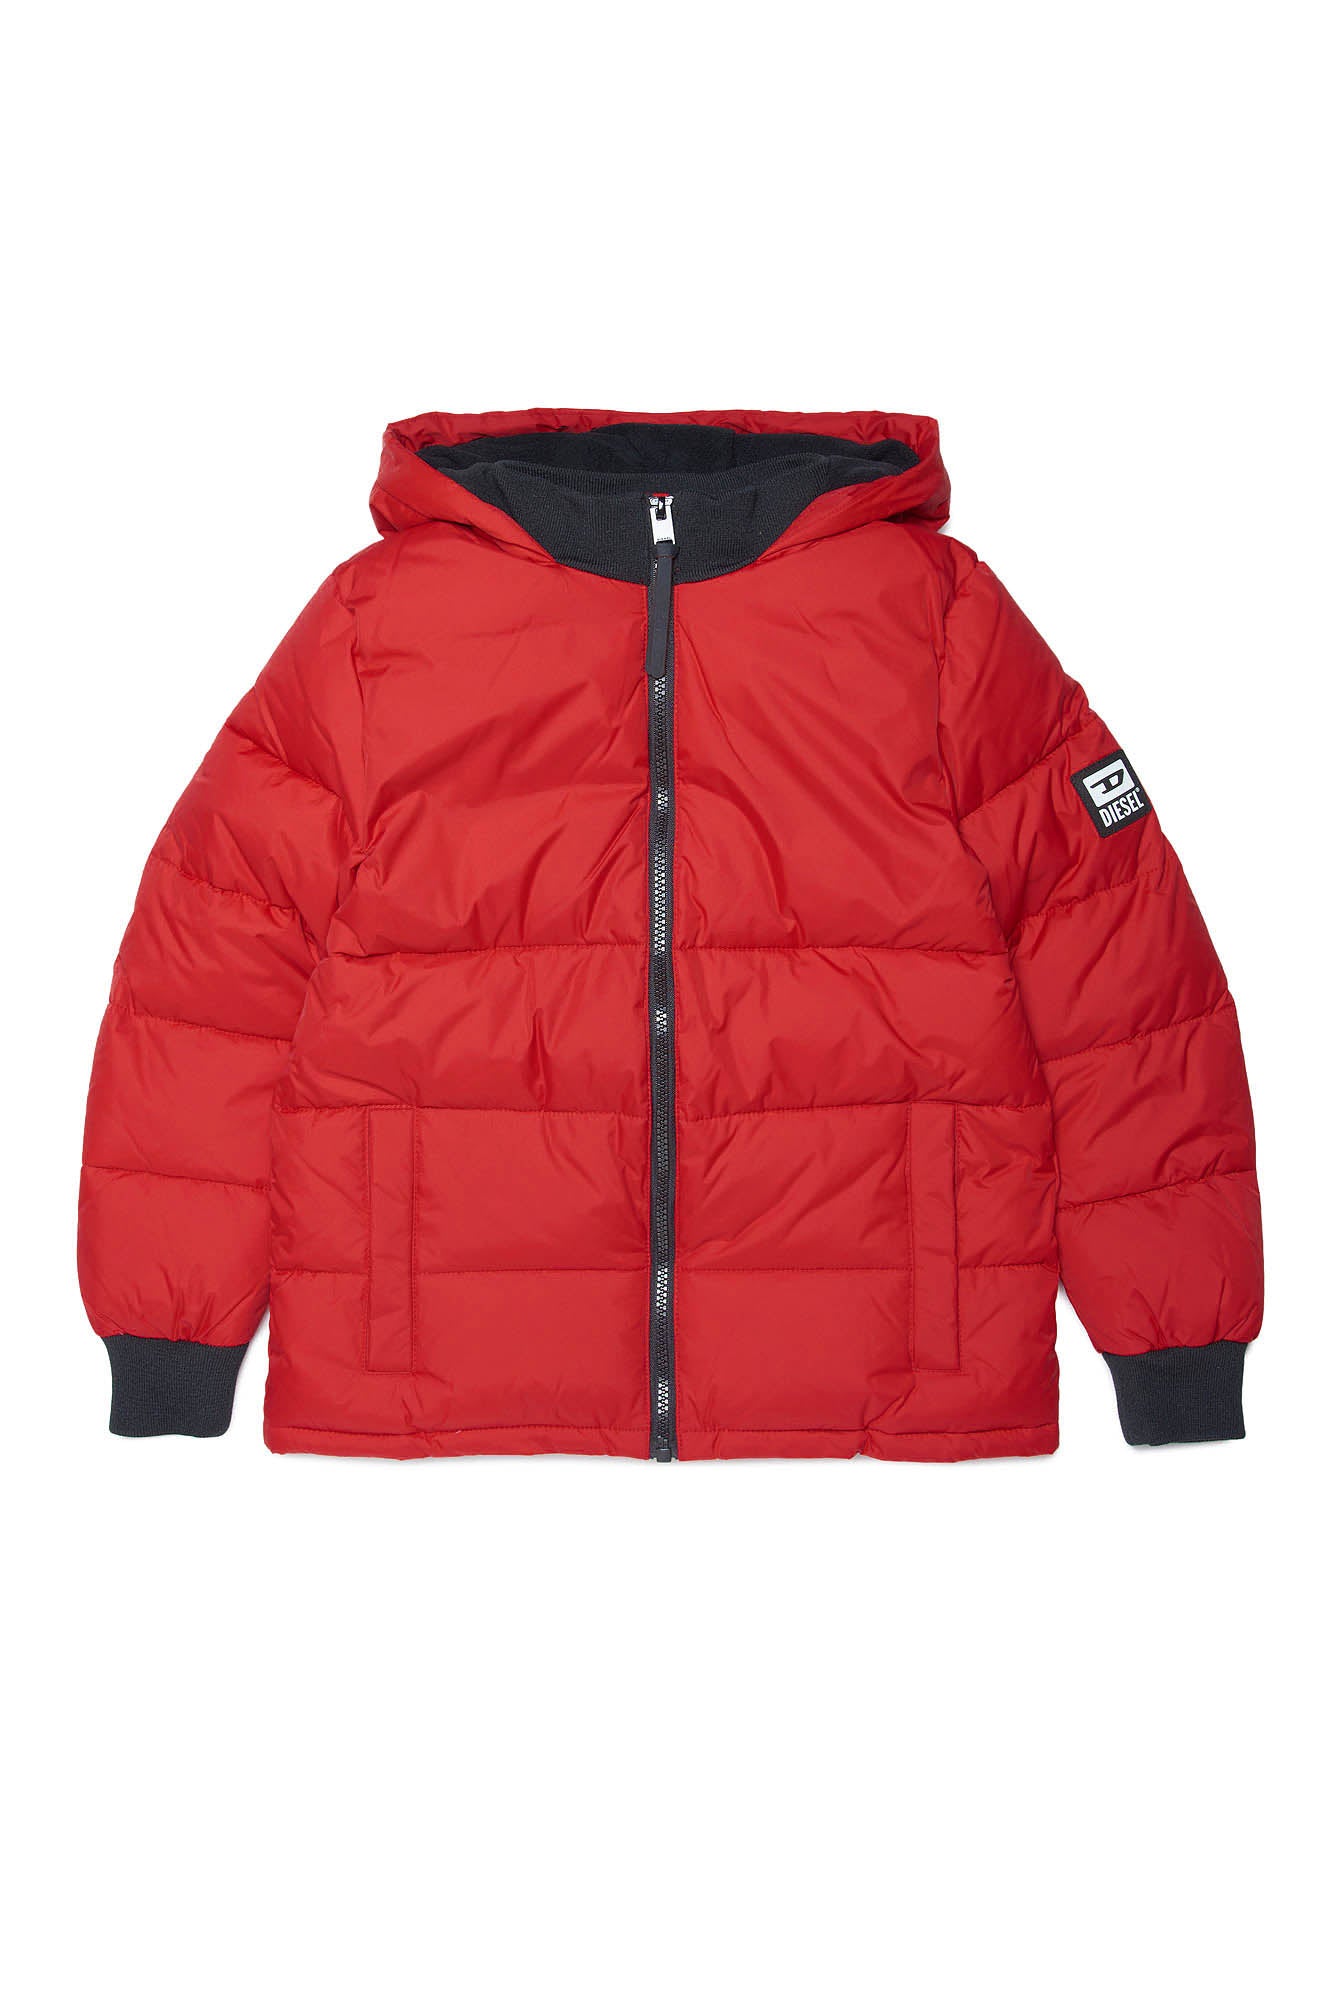 Diesel red down jacket with logo on the back | Brave Kid